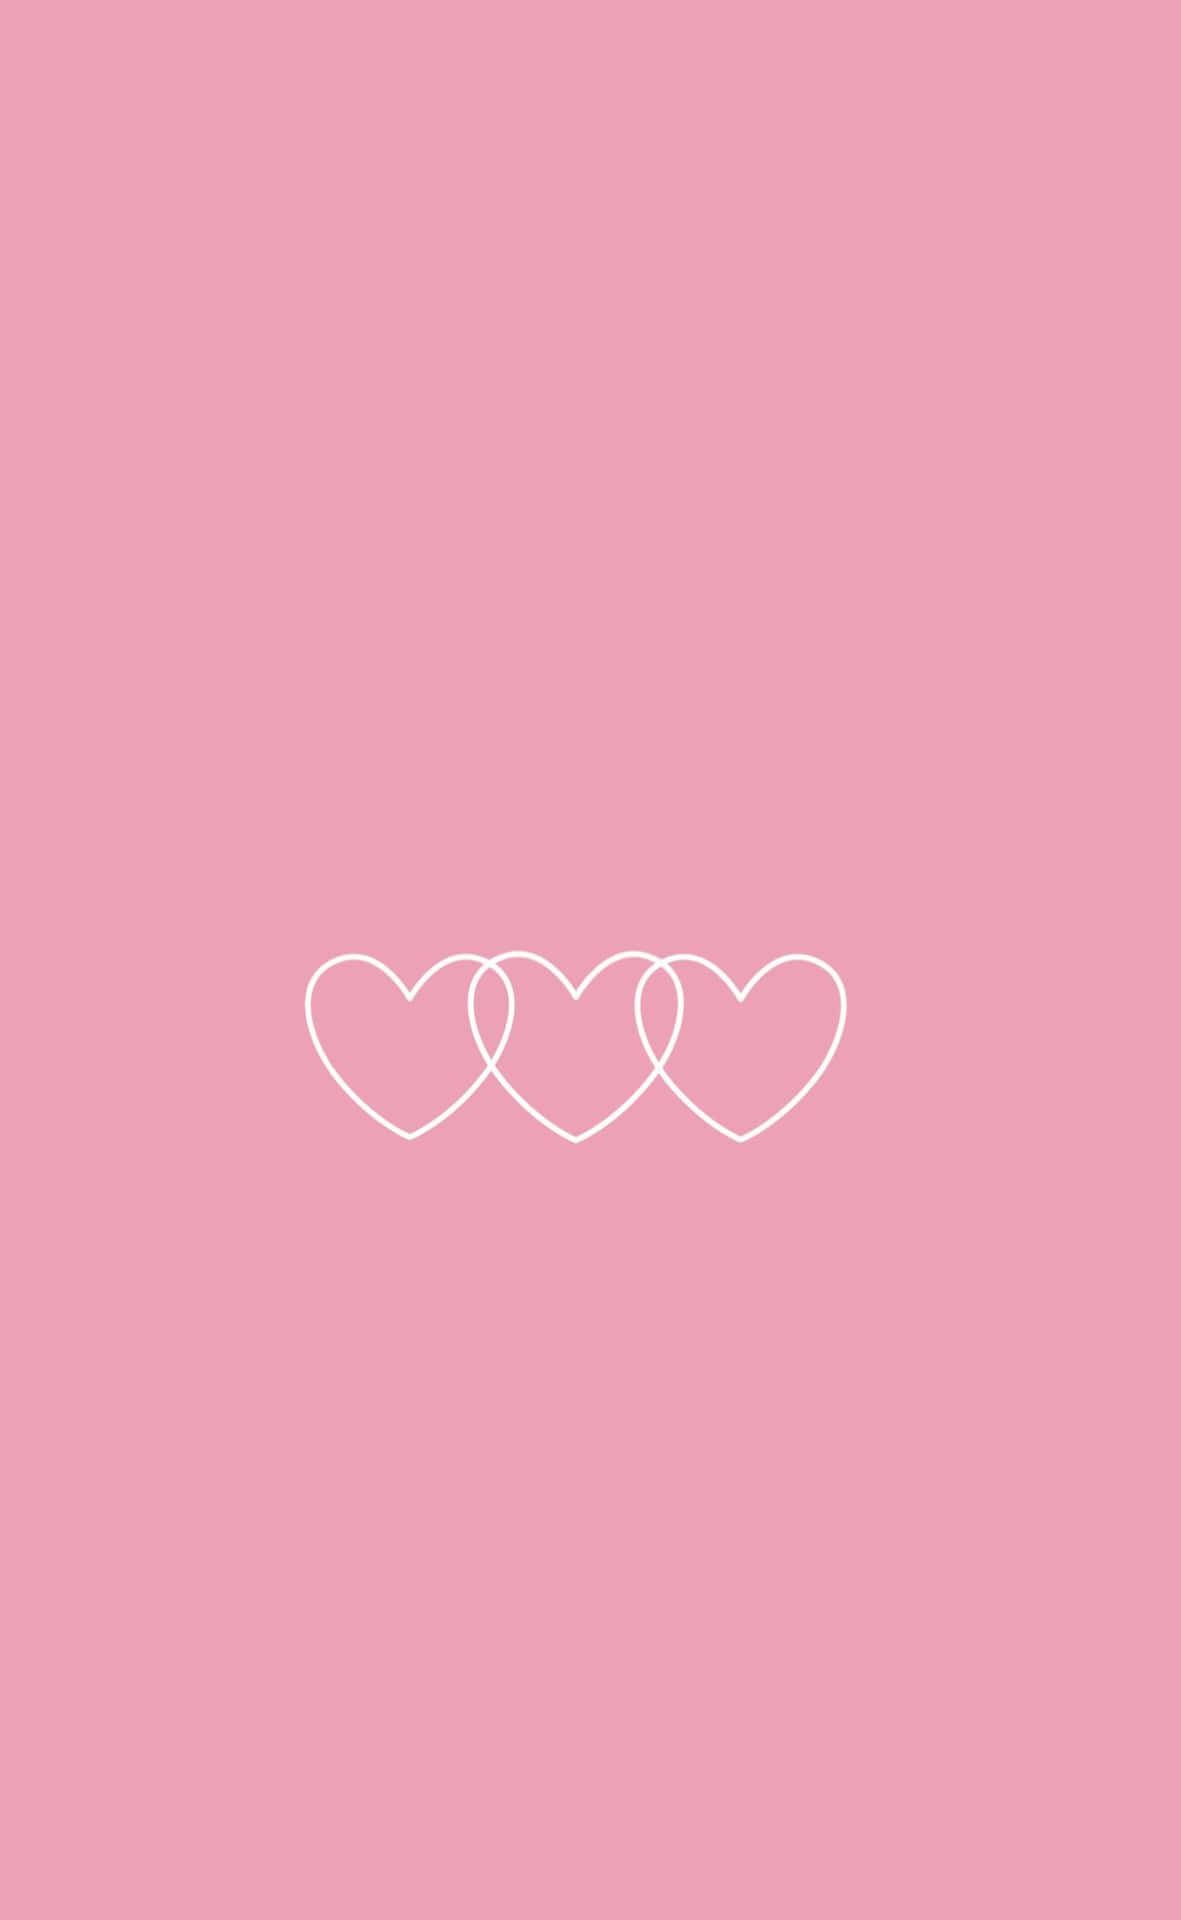 A White Heart Logo On A Pink Background Wallpaper